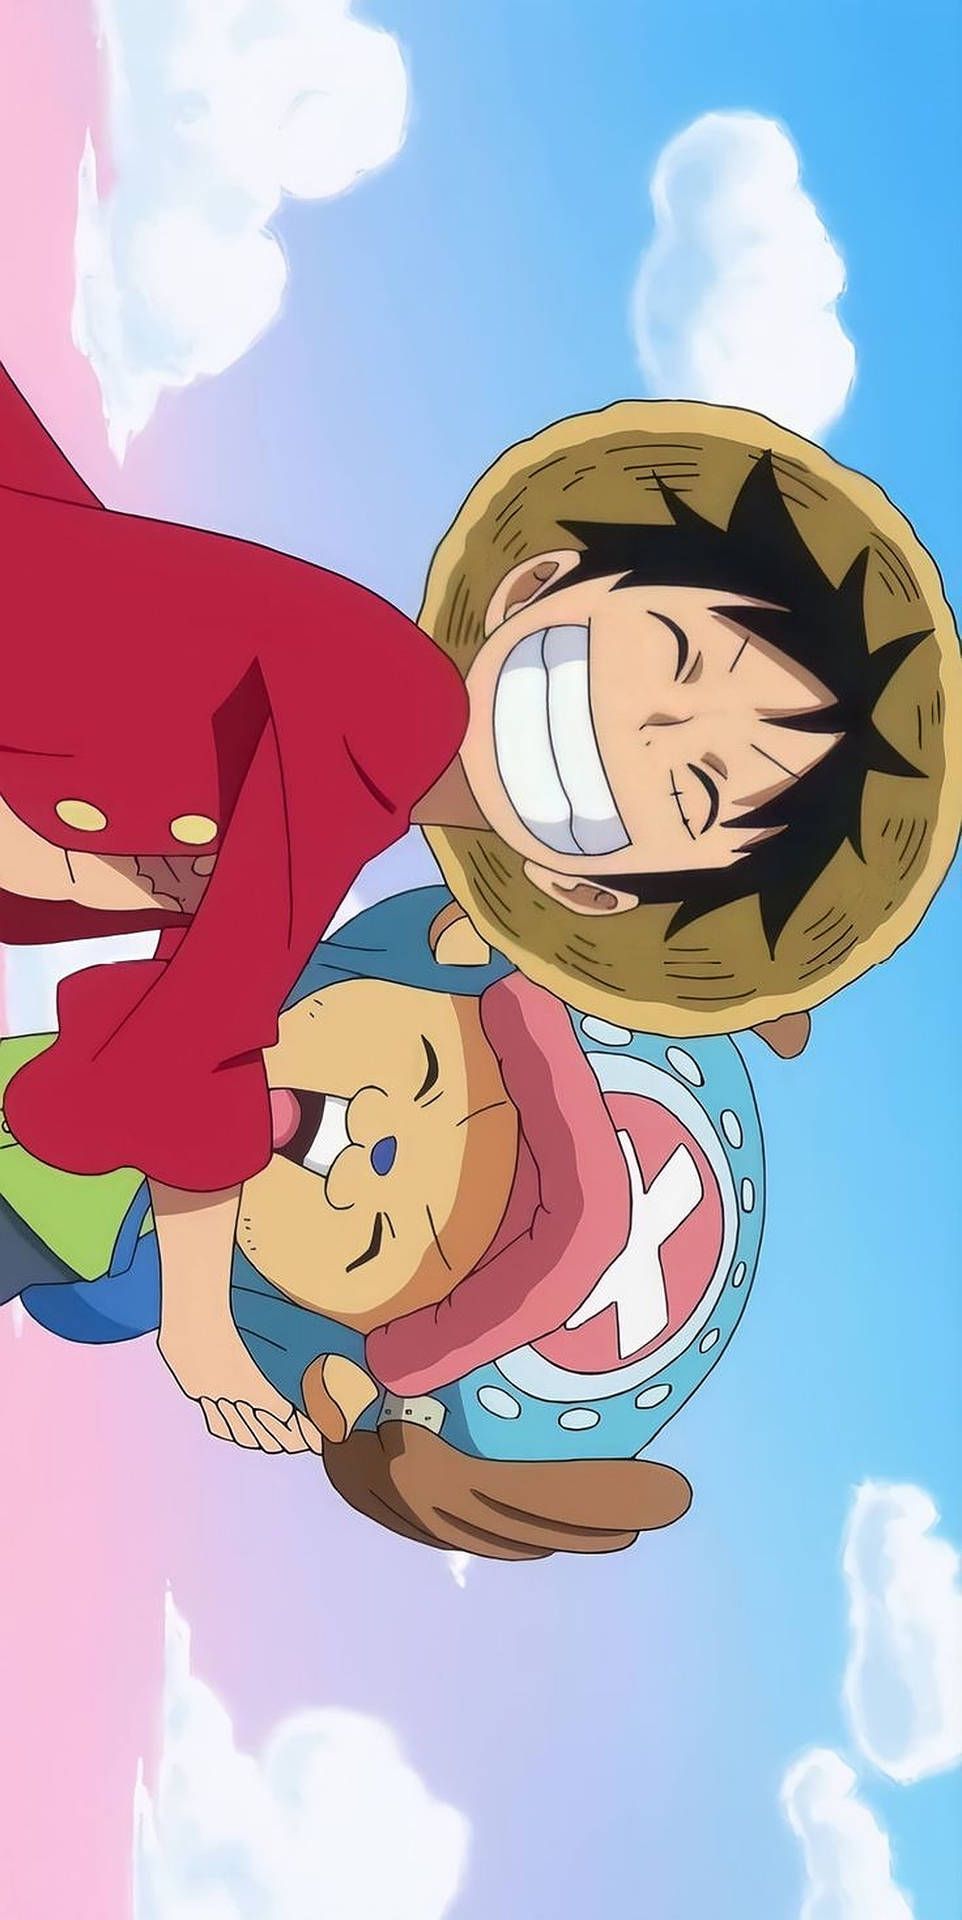 Caption: Luffy and Chopper From One Piece on iPhone Wallpaper